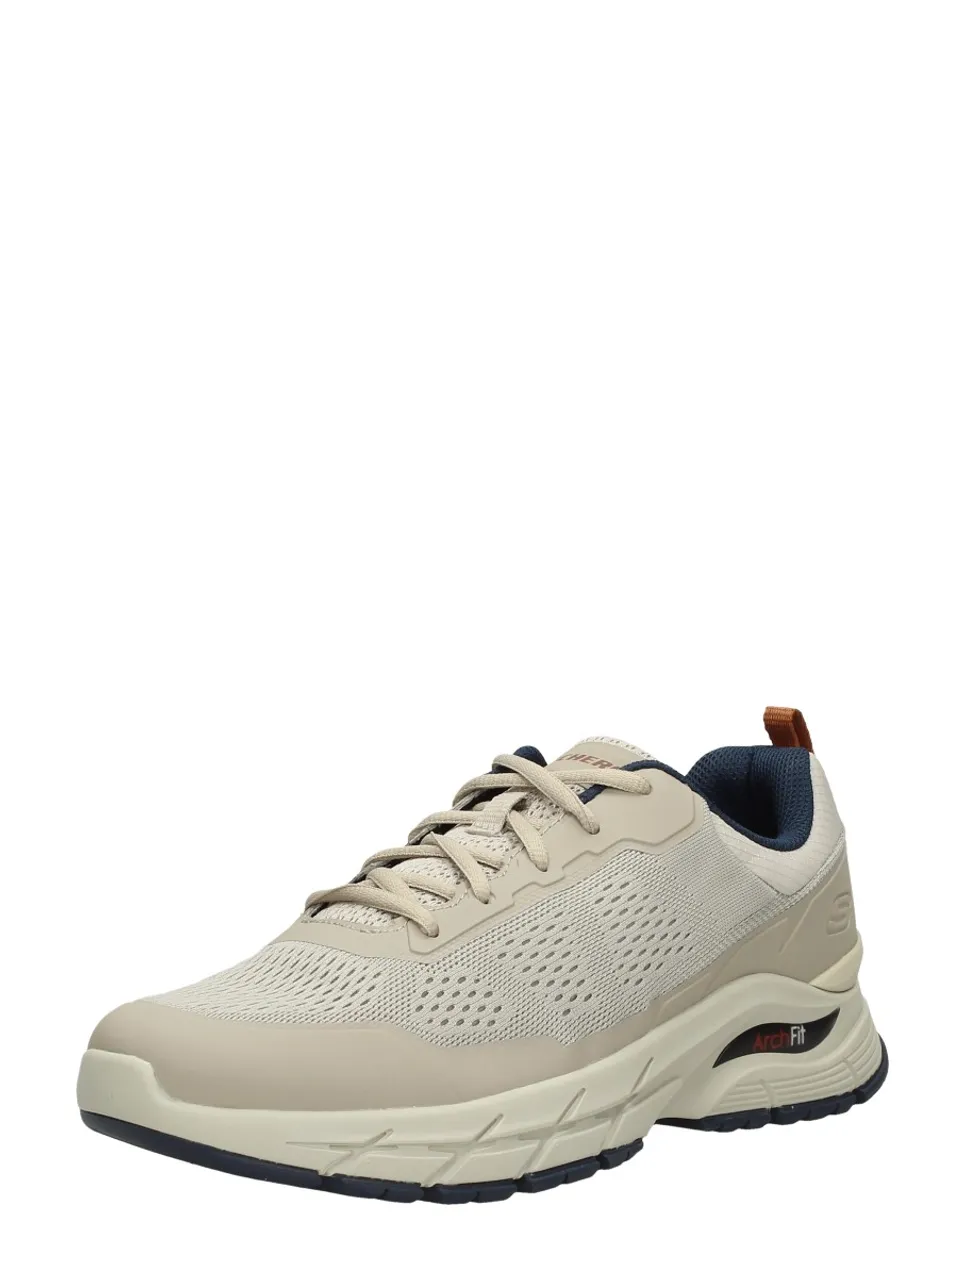 Skechers - Skechers Arch Fit Baxter - Pendroy